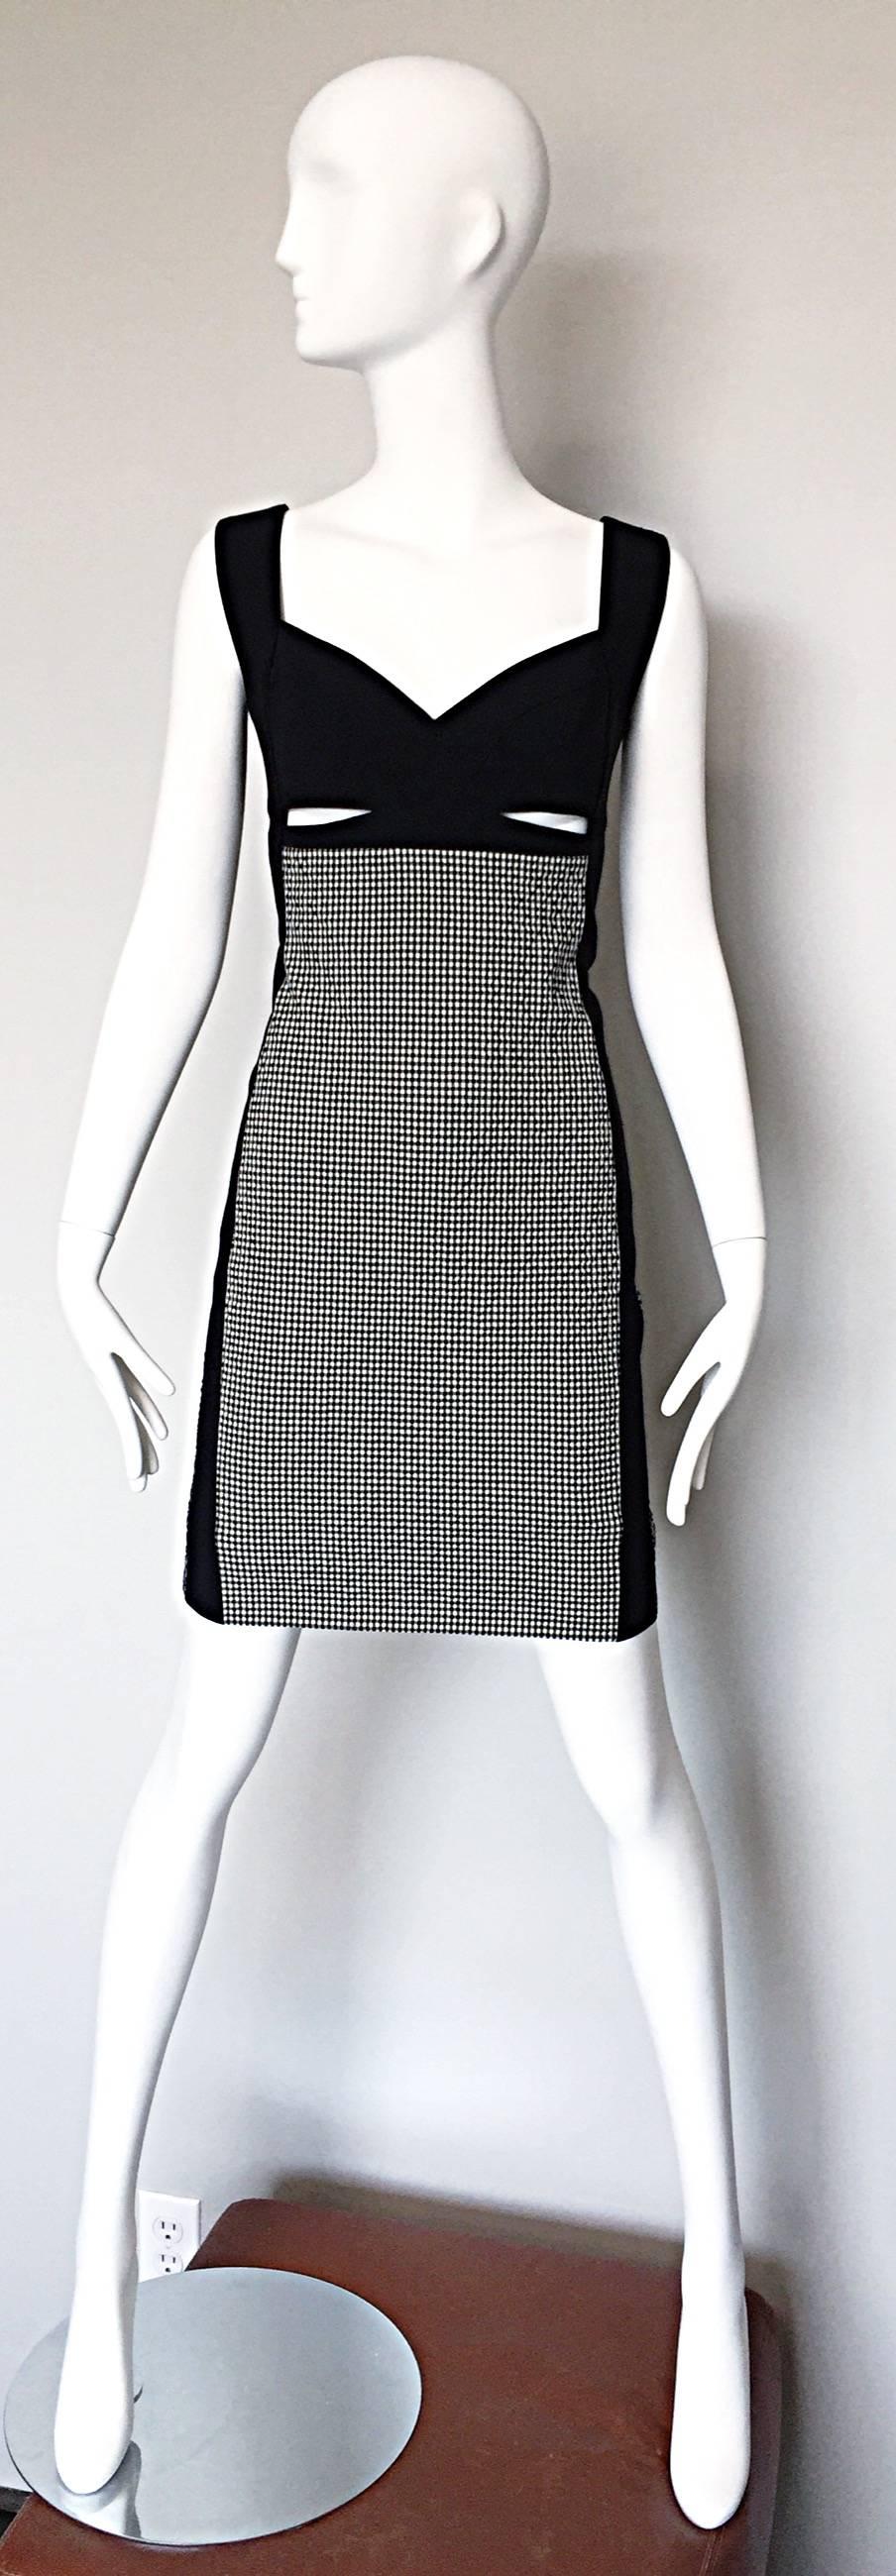 Sexy NARCISCO RODRIGUEZ black and white gingham paneled Bodycon cut-out dress! Features a black fitted bodice, with a sweetheart neckline and cut-outs below the bust. Reveals just the right amount of skin. Super flattering to the body, and hugs the